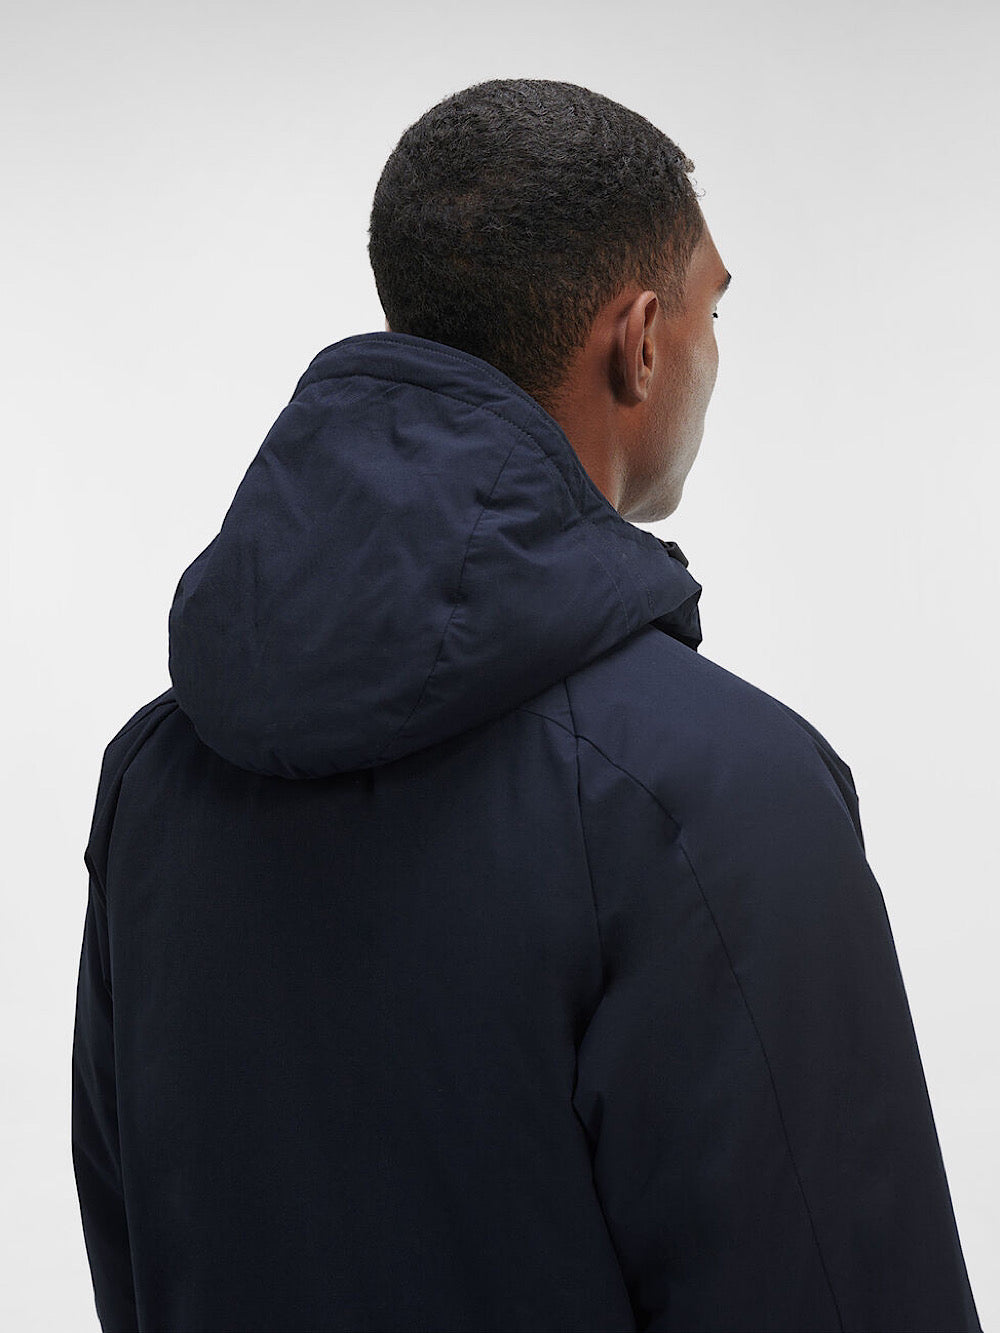 CP Company Navy blue padded jacket with hood